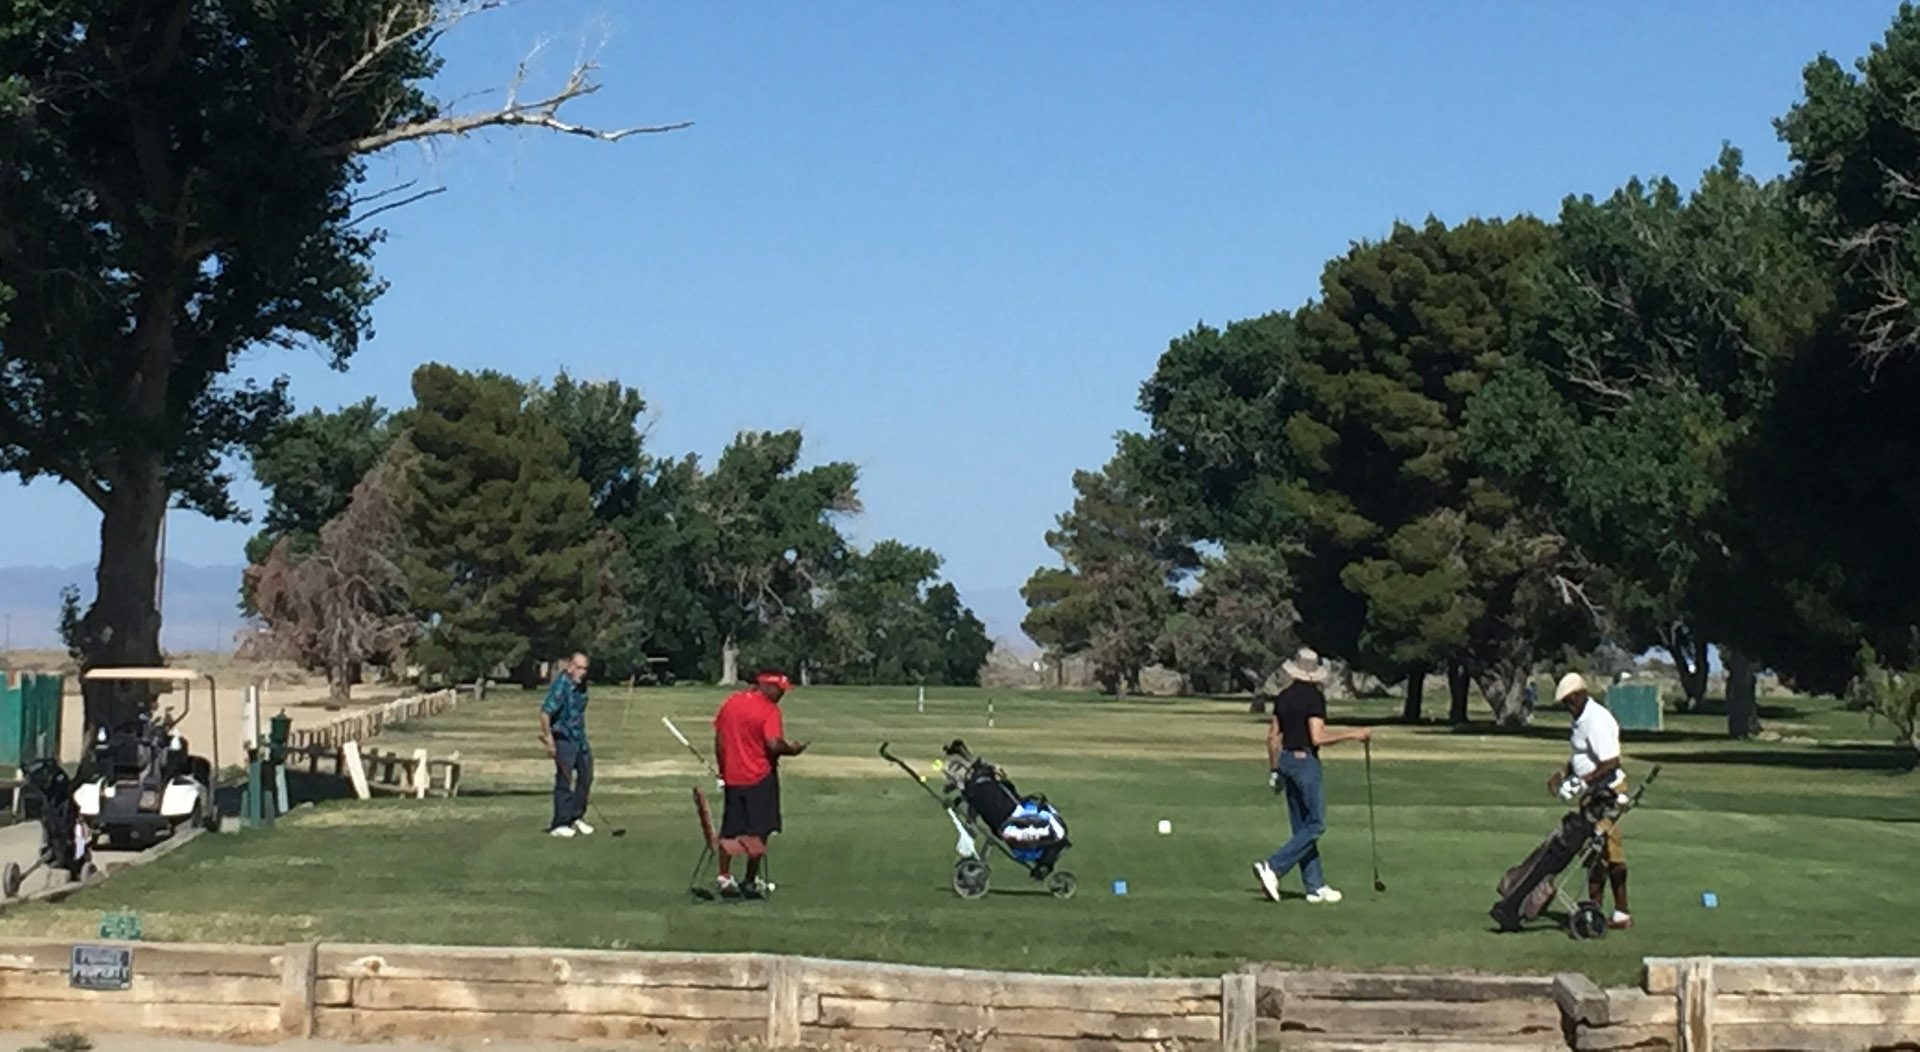 Antelope Valley Country Club